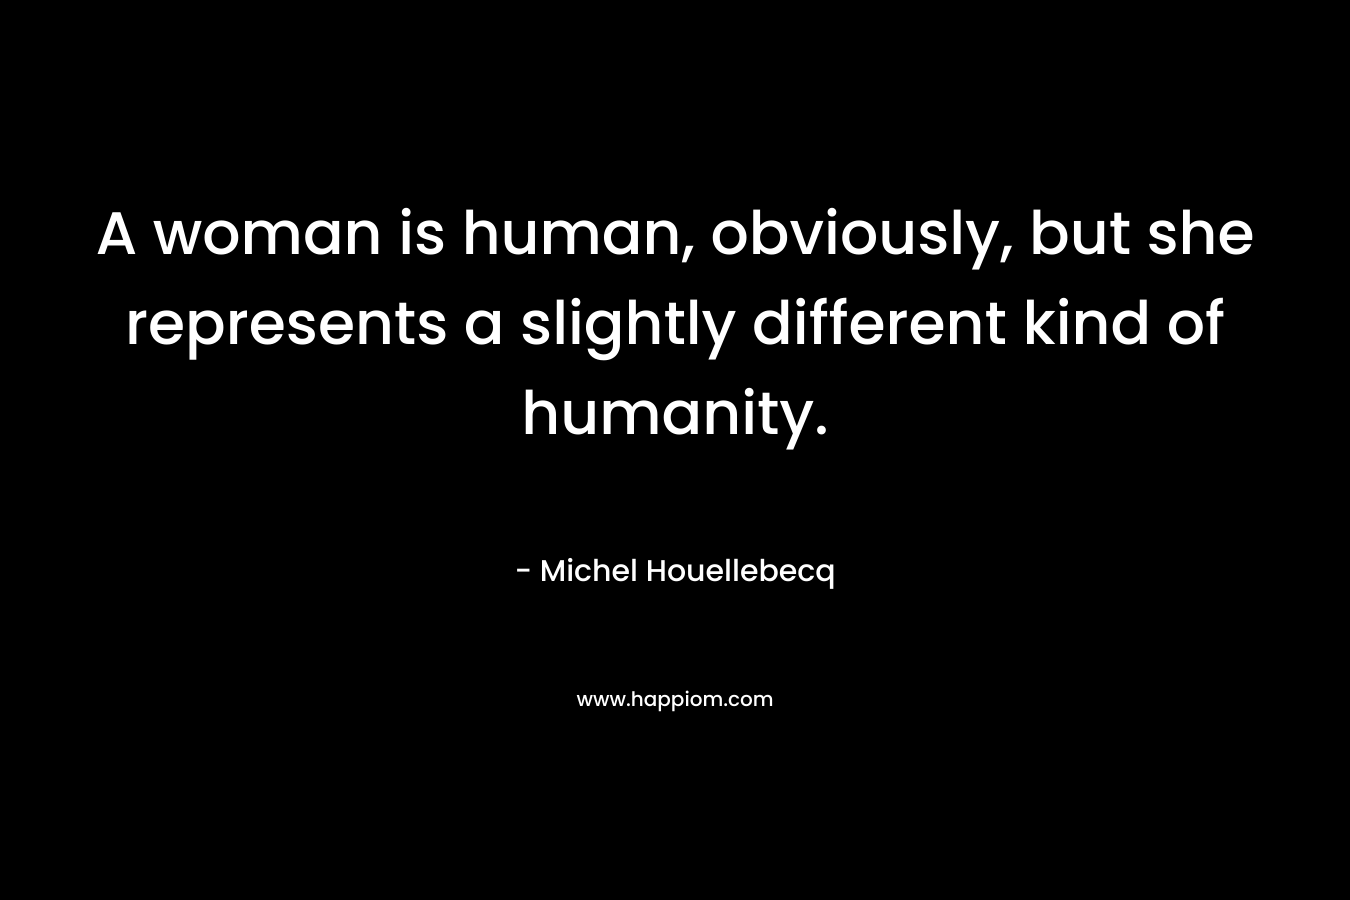 A woman is human, obviously, but she represents a slightly different kind of humanity. – Michel Houellebecq